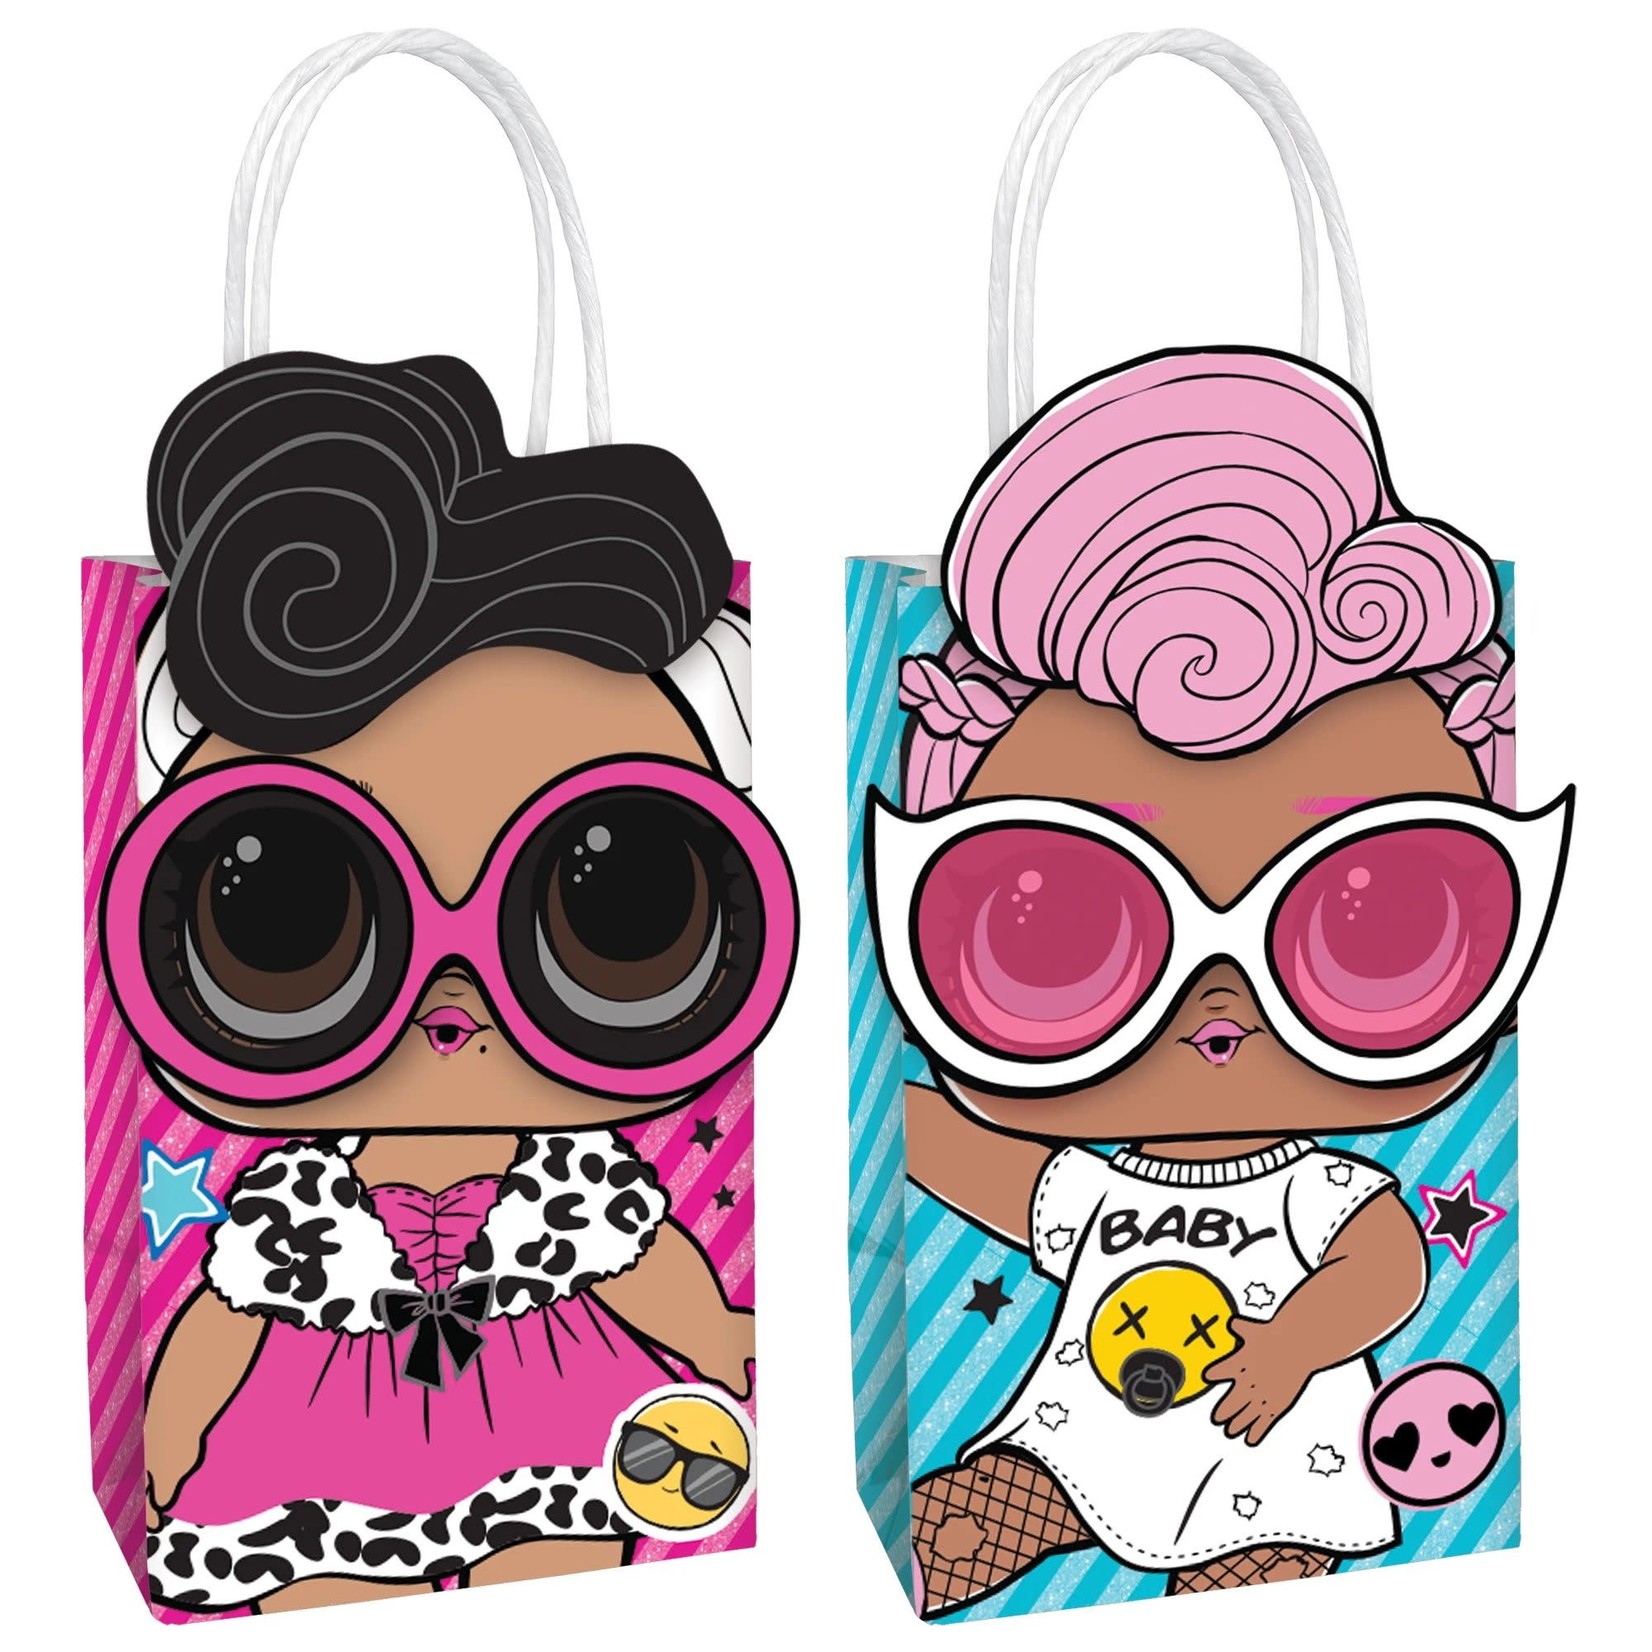 LOL Surprise, Together 4 Eva! Create Your Own Bags